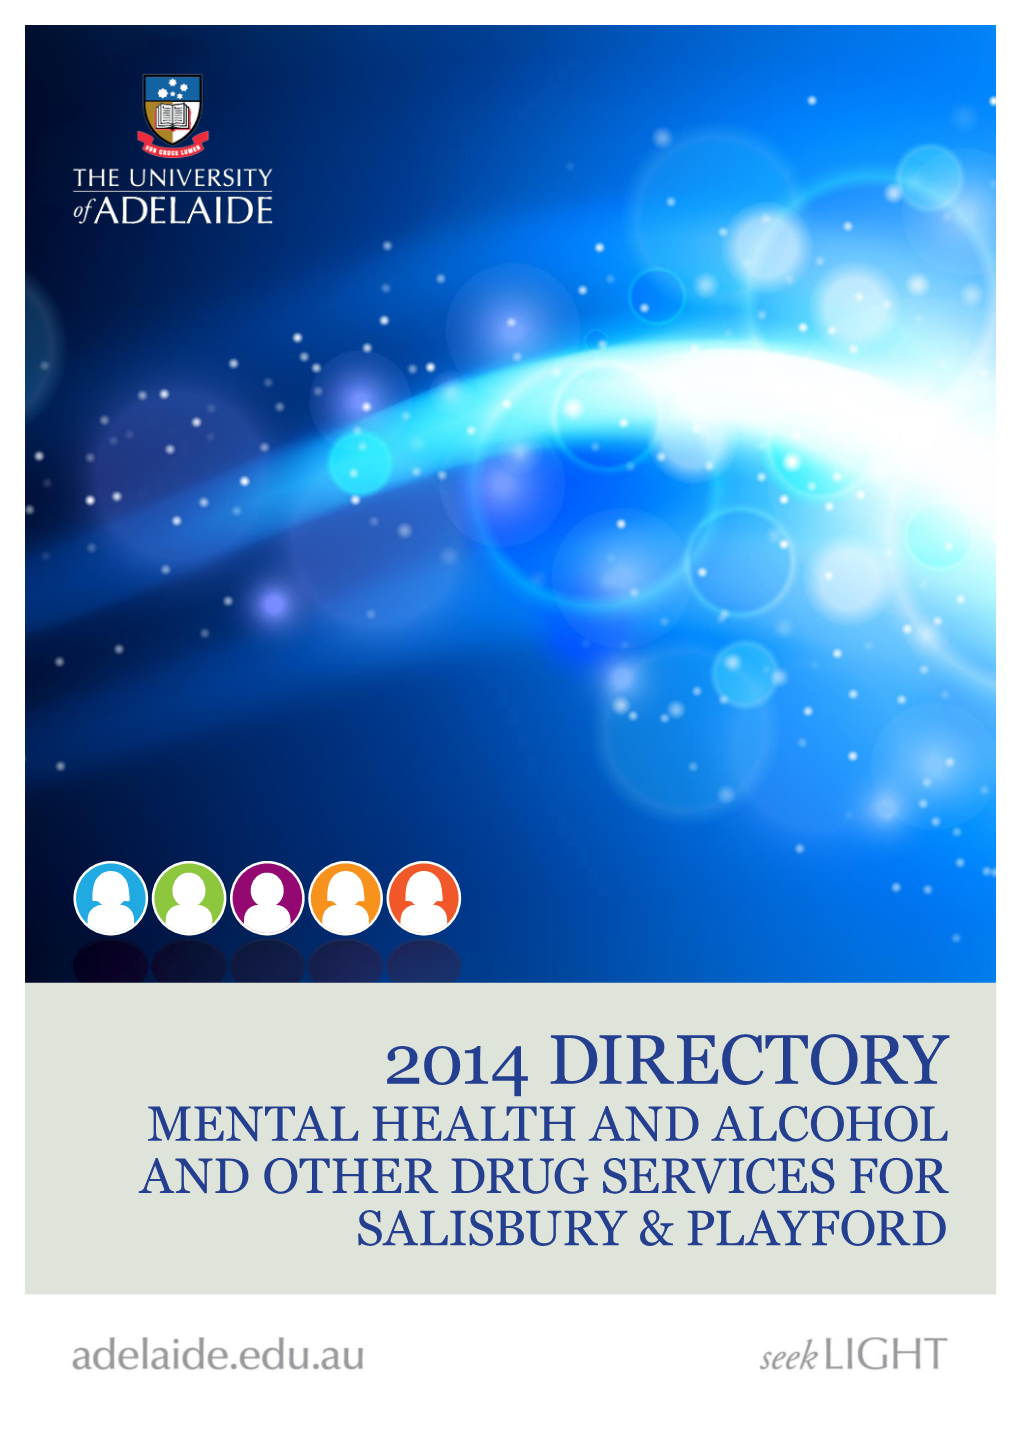 Mental Health and Alcohol and Other Drug Services for Salisbury & Playford